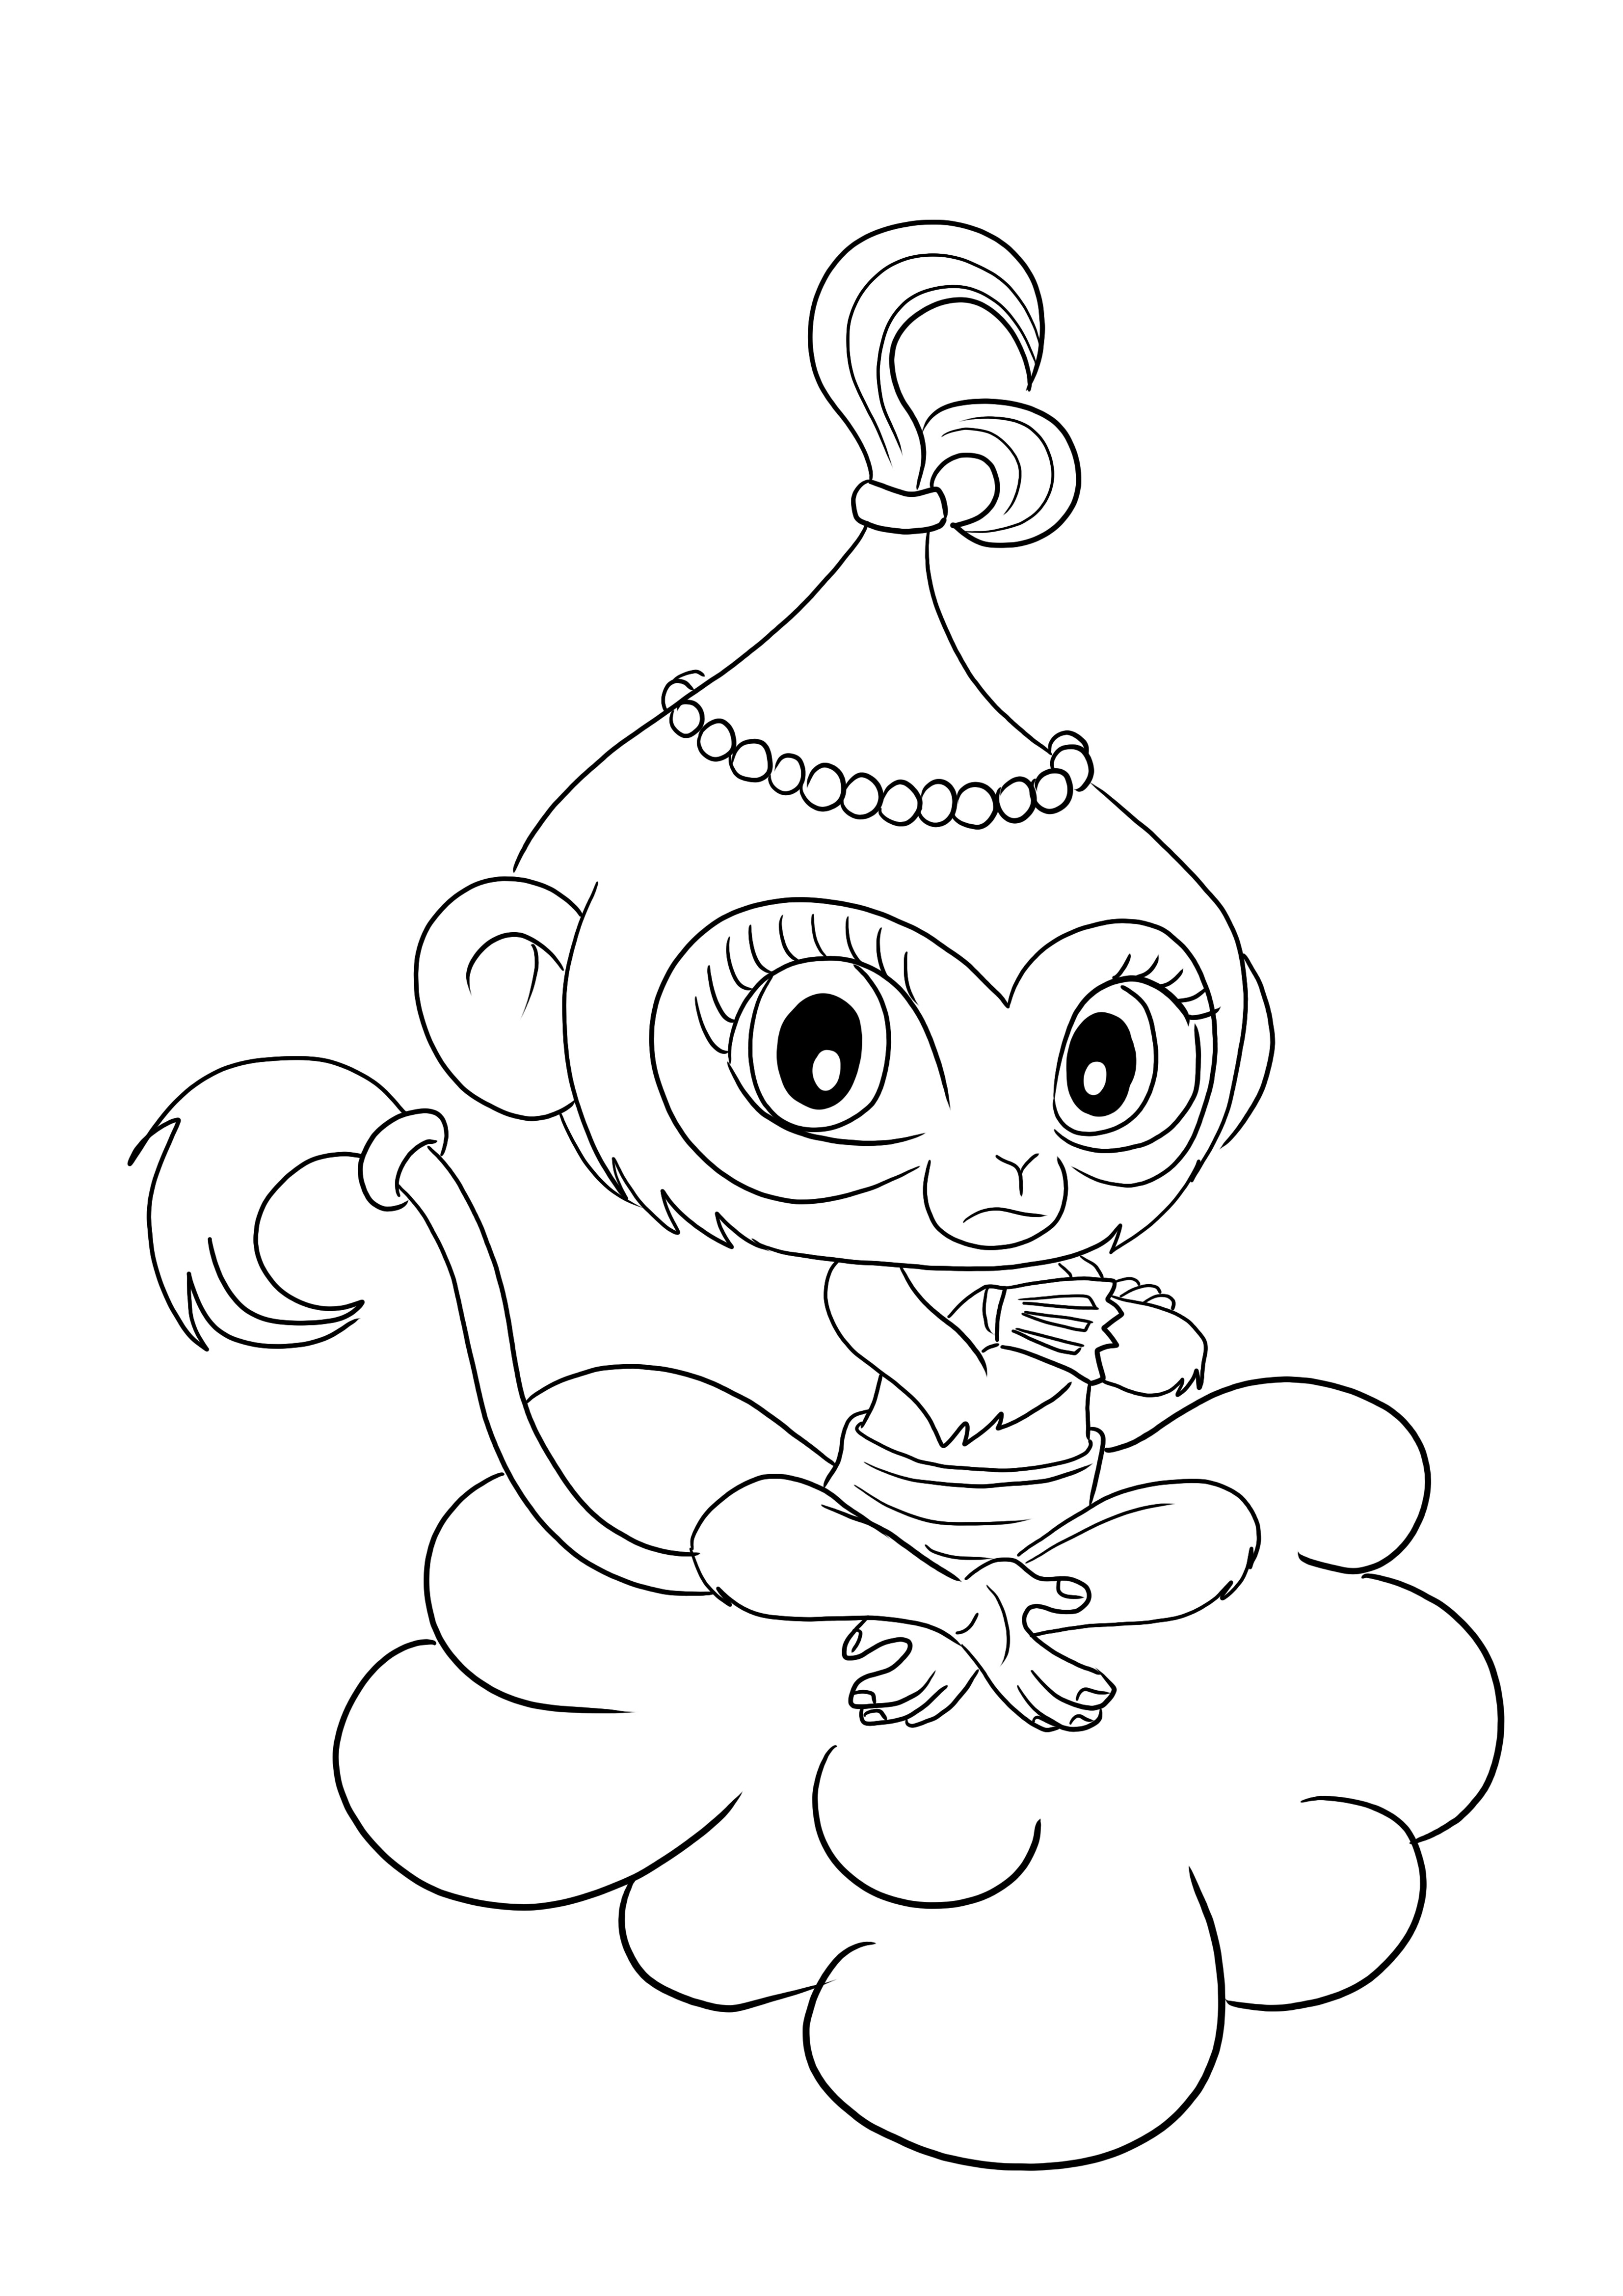 Tala from Shimmer and Shine page is free to download or print for kids